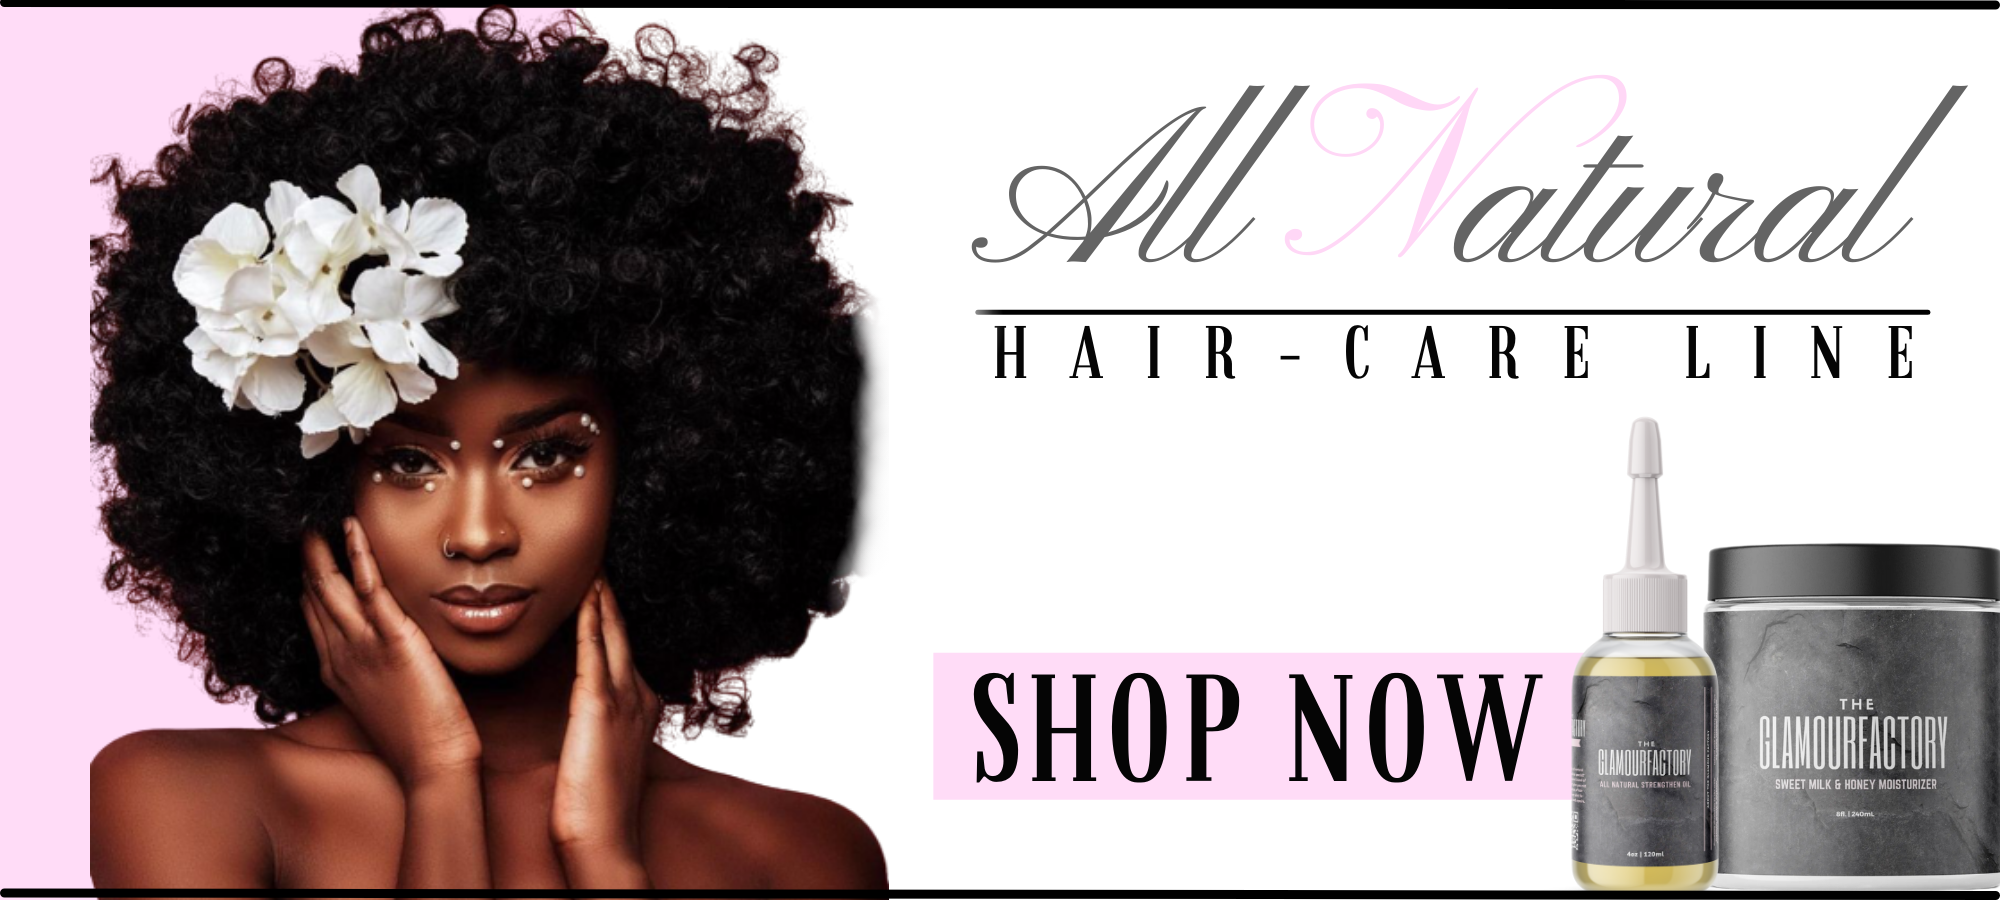 All Natural Hair Care Line